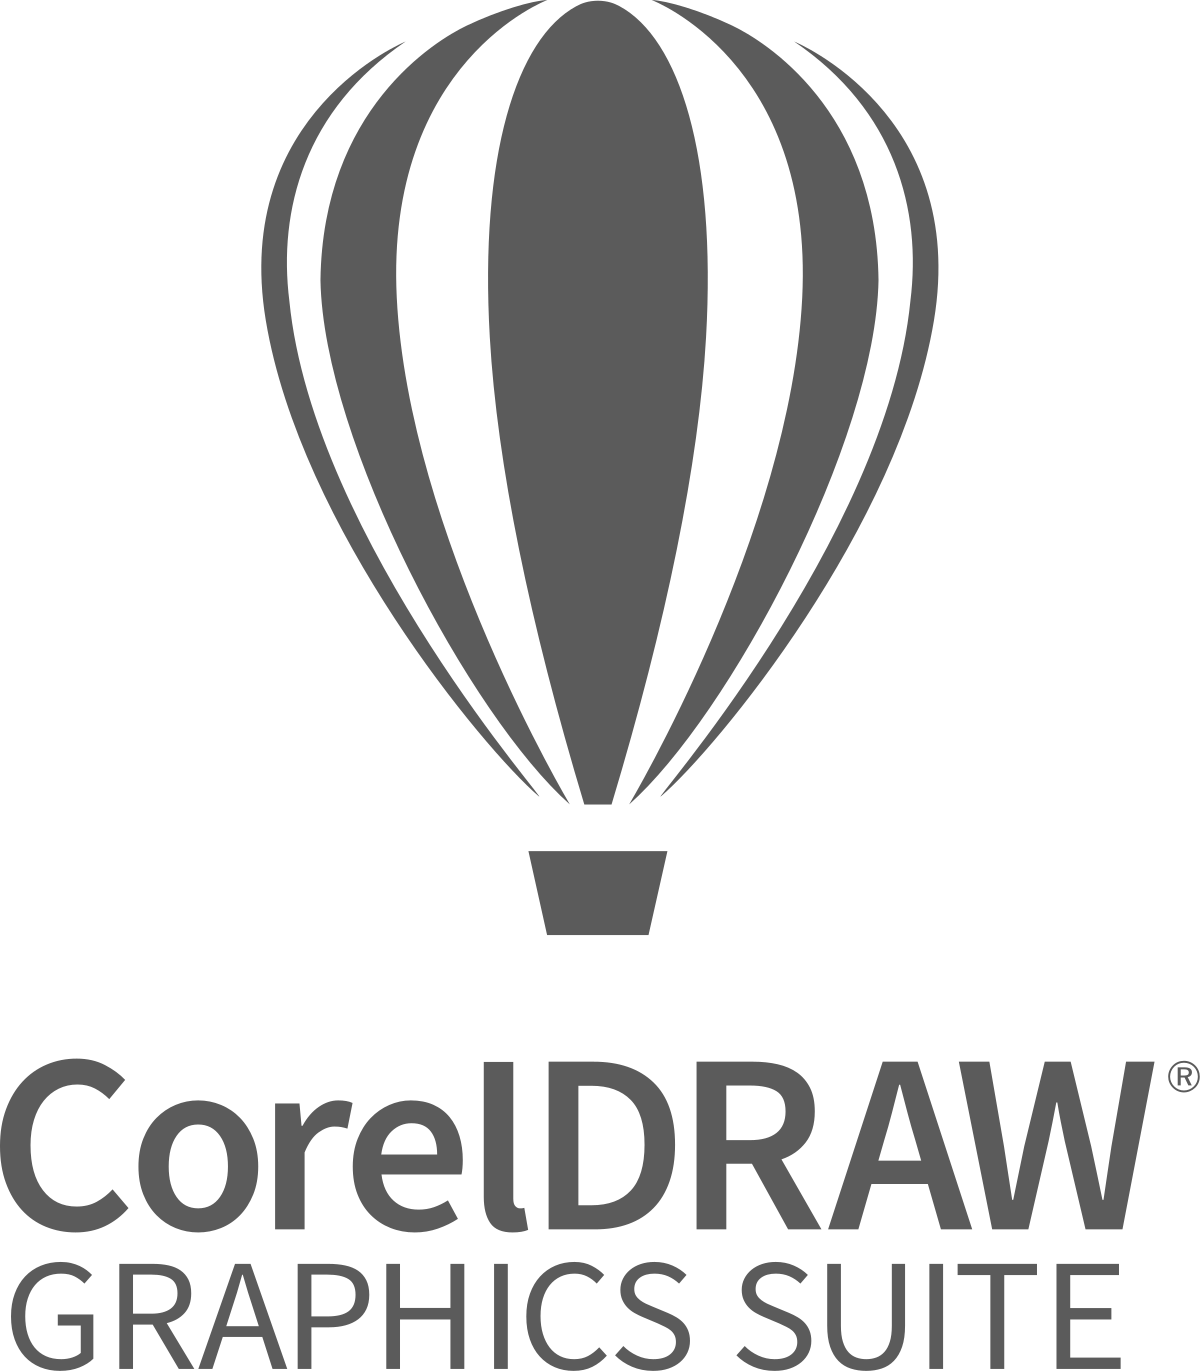 coreldraw latest version free download for windows 7 with key